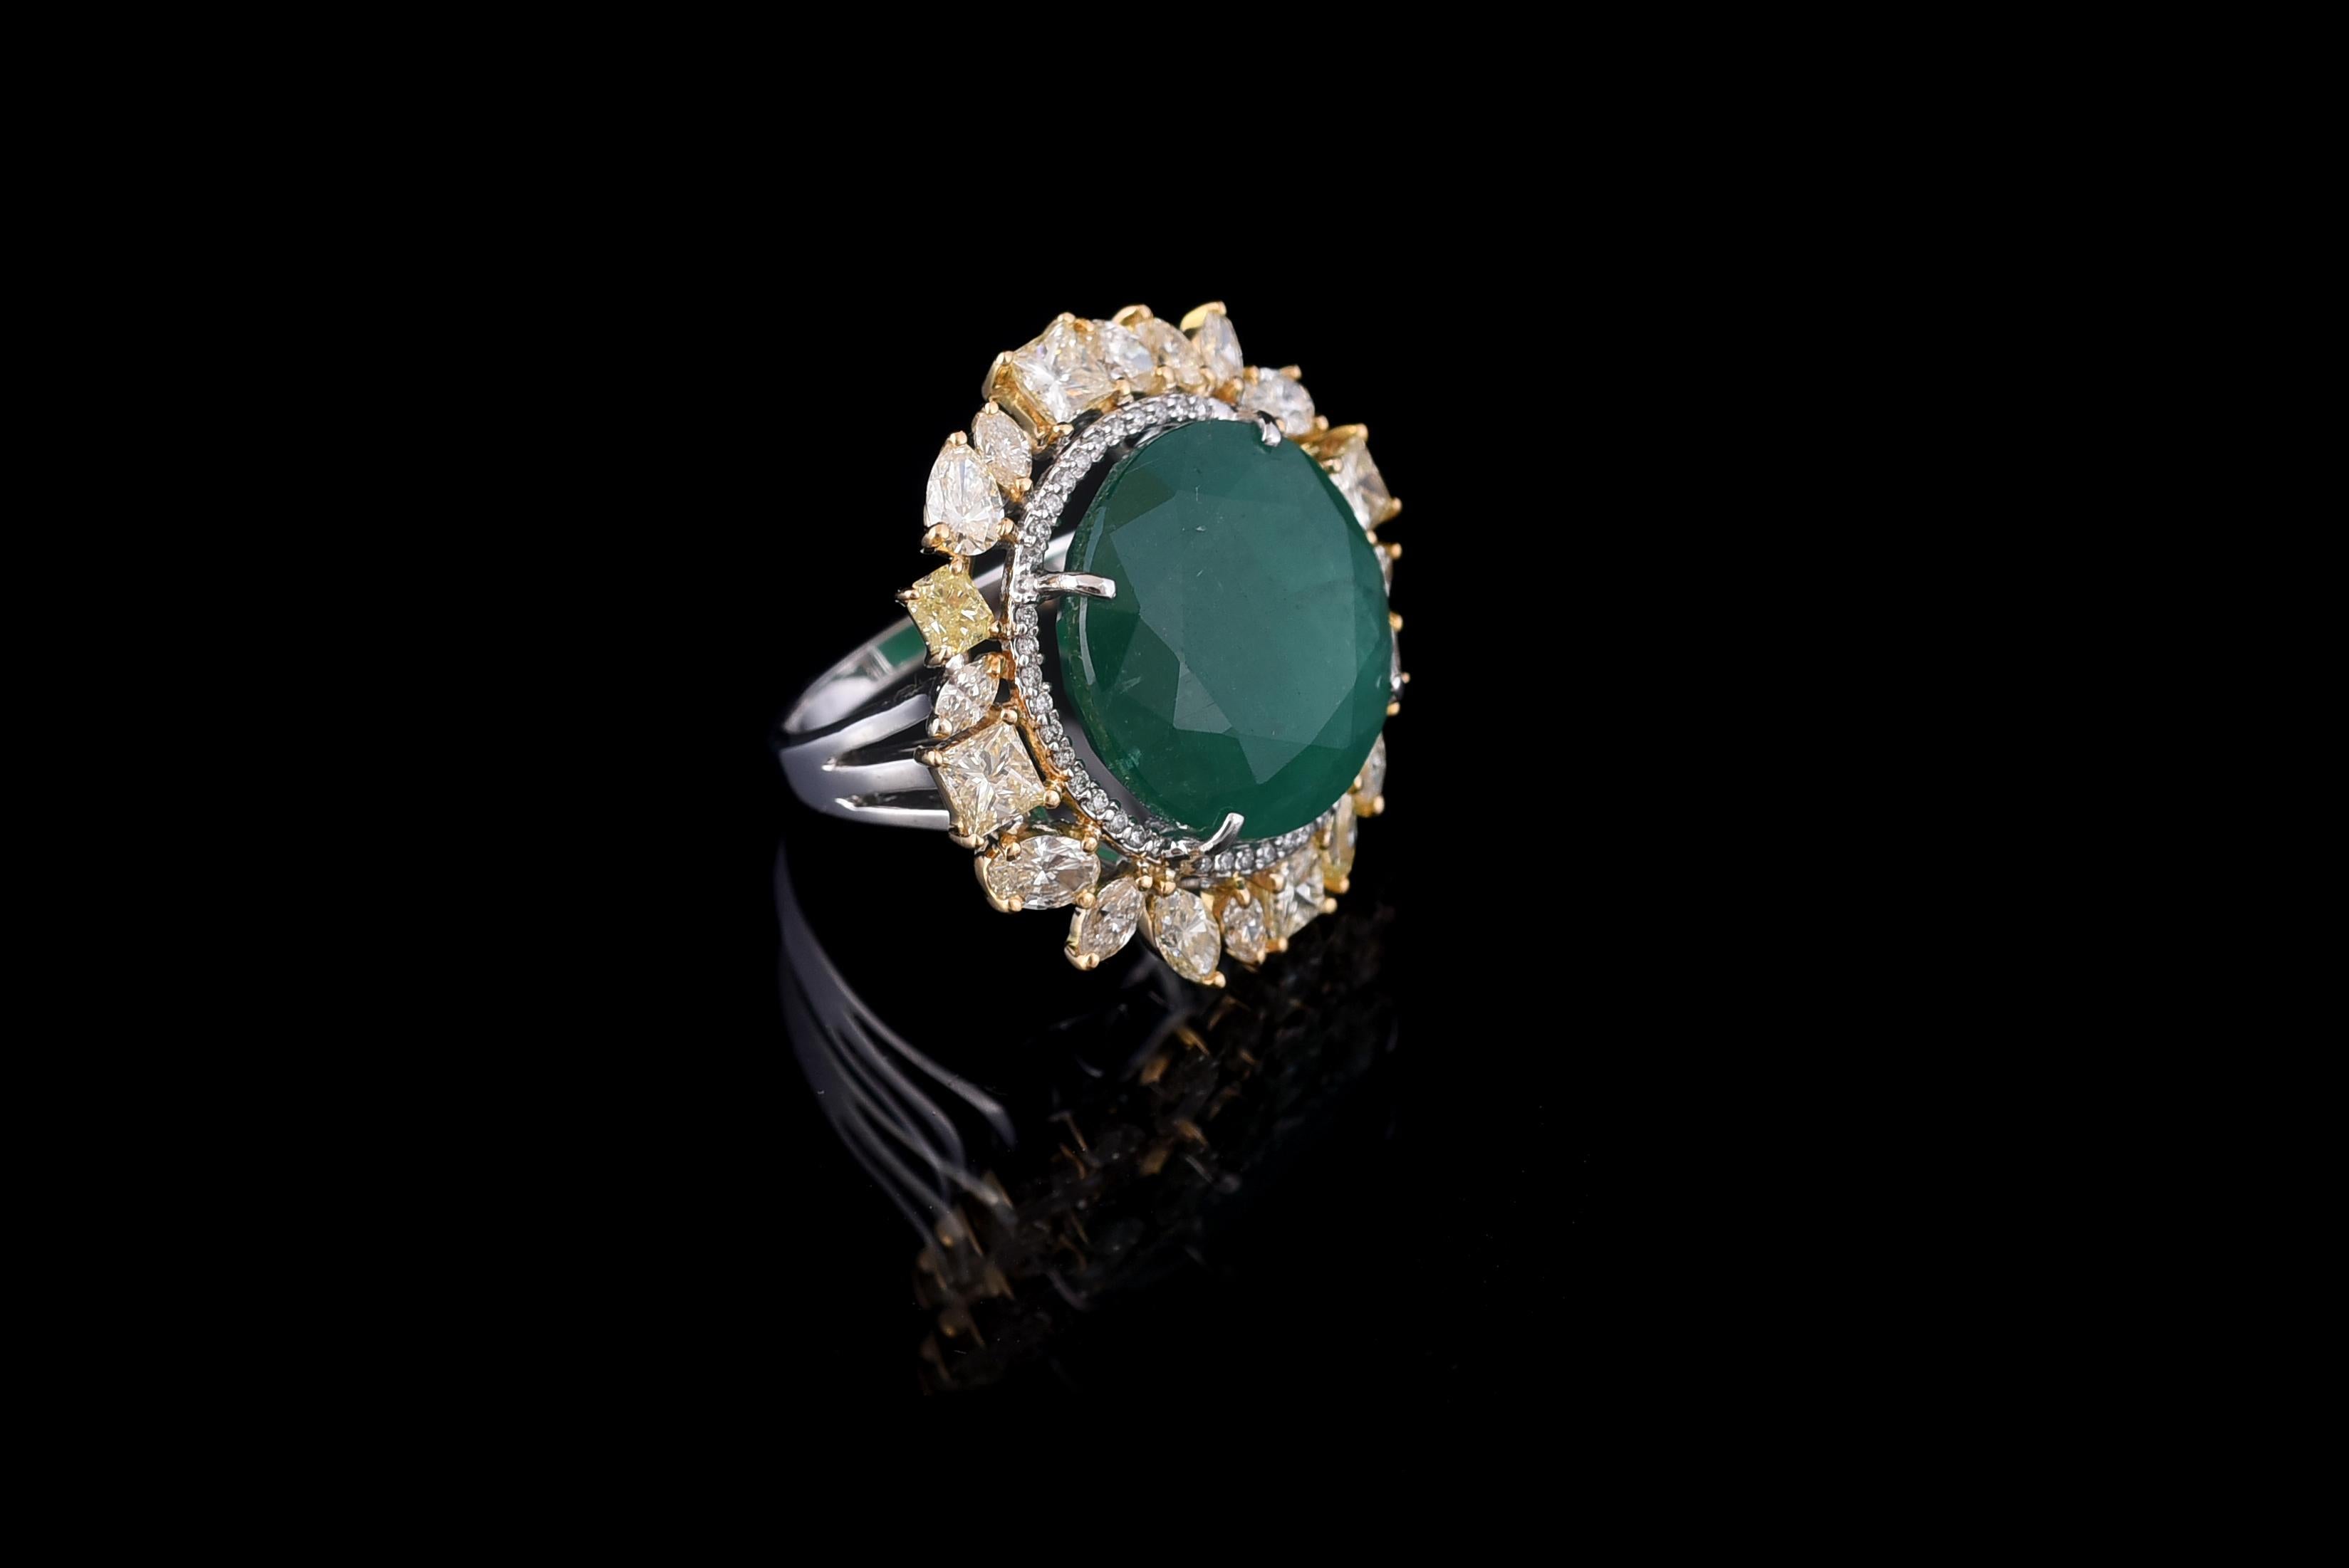 A classic round Emerald Cocktail Ring set in 18K gold with fancy yellow diamonds. The Emerald is of Zambian origin, and is completely natural without any treatment. The weight of the Emerald is 15.70 carats. The combined weight of the diamonds is